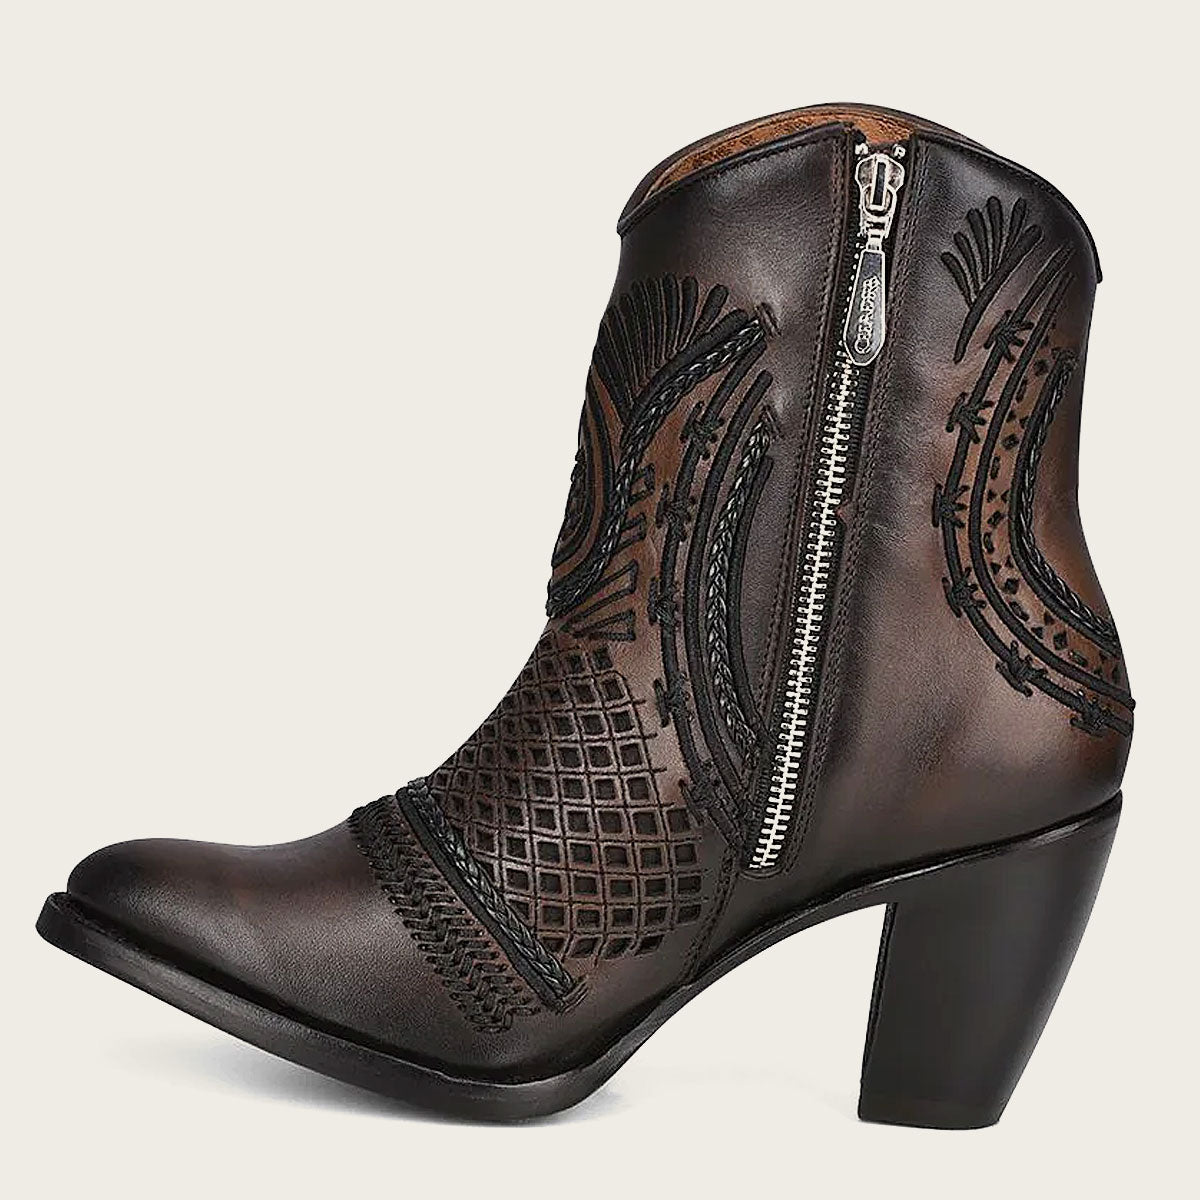 Artisan brown leather booties. The internal closure allows for easy adjustment, ensuring a snug and secure fit.